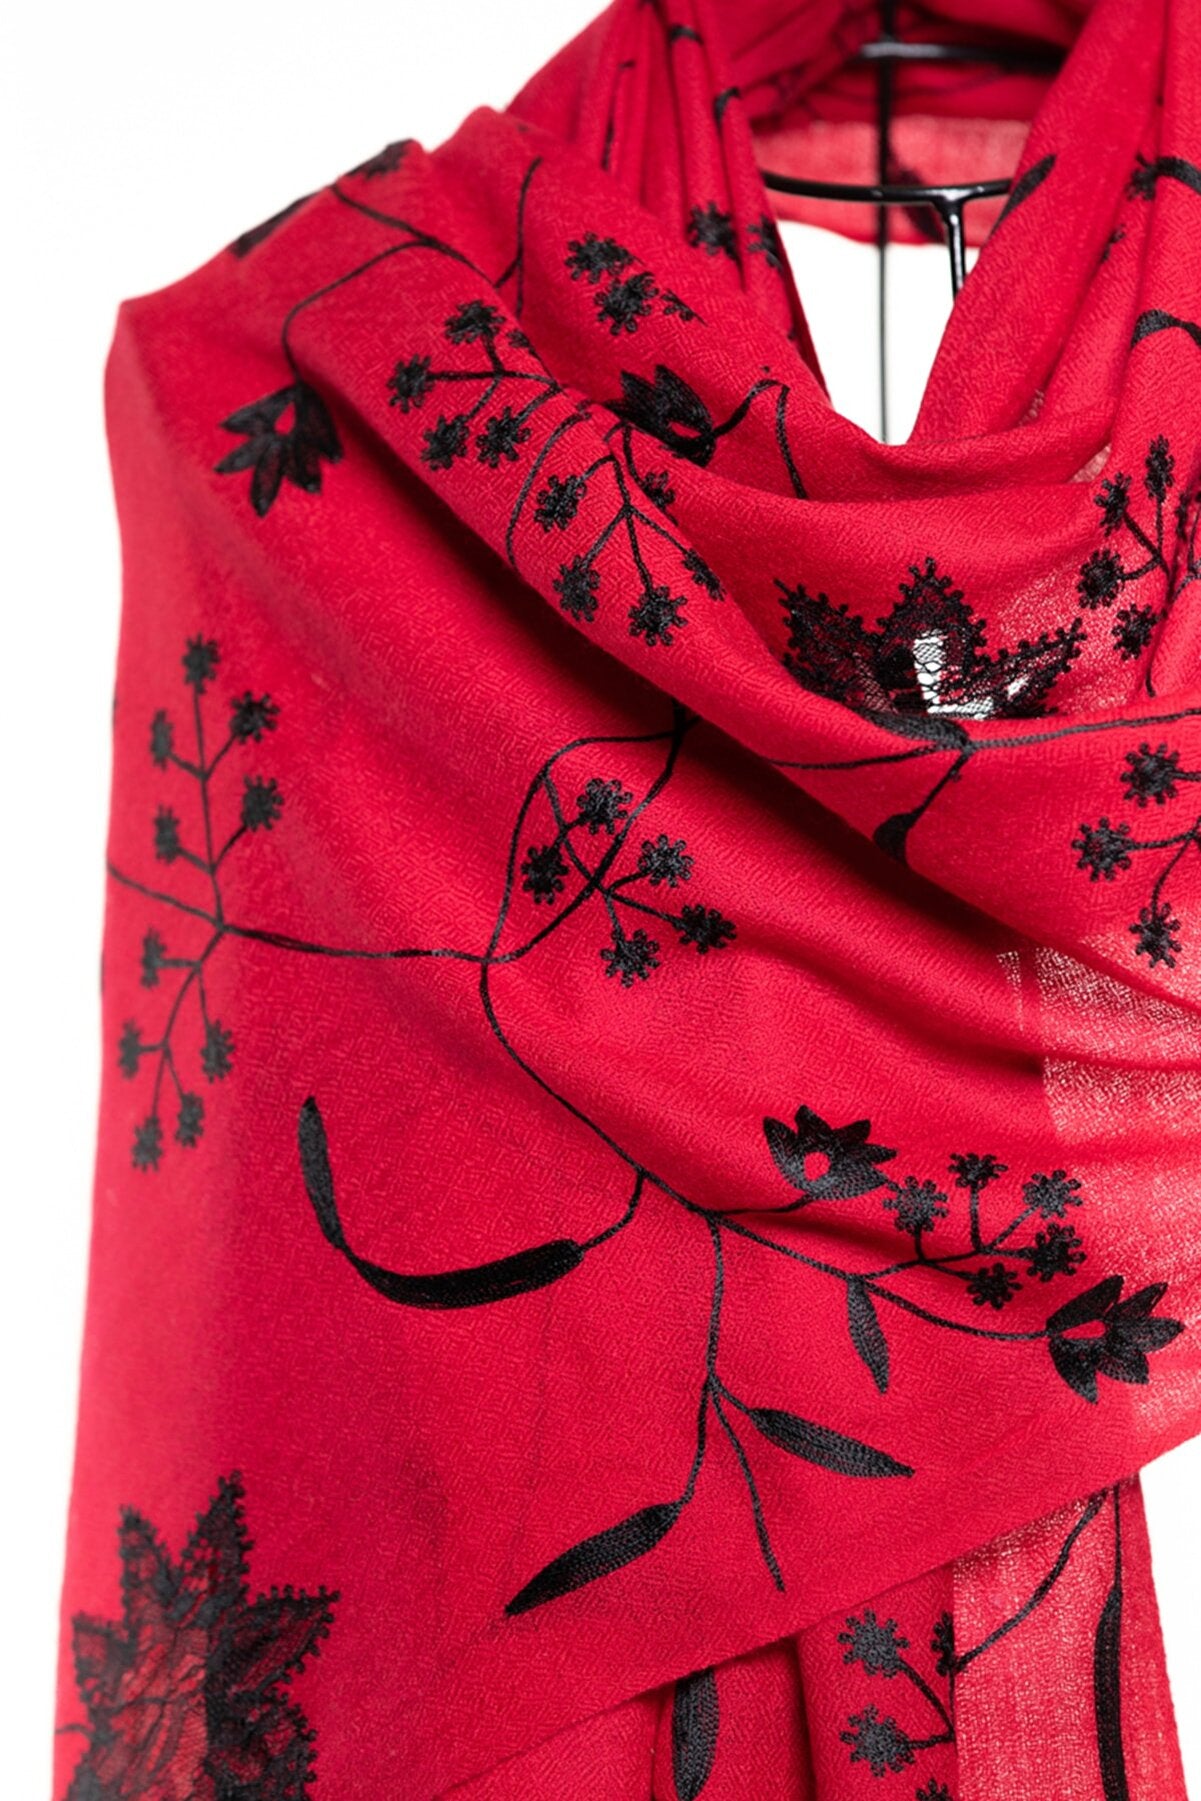 Lace & Embroidery Floral Sheer Shawl - Red Black